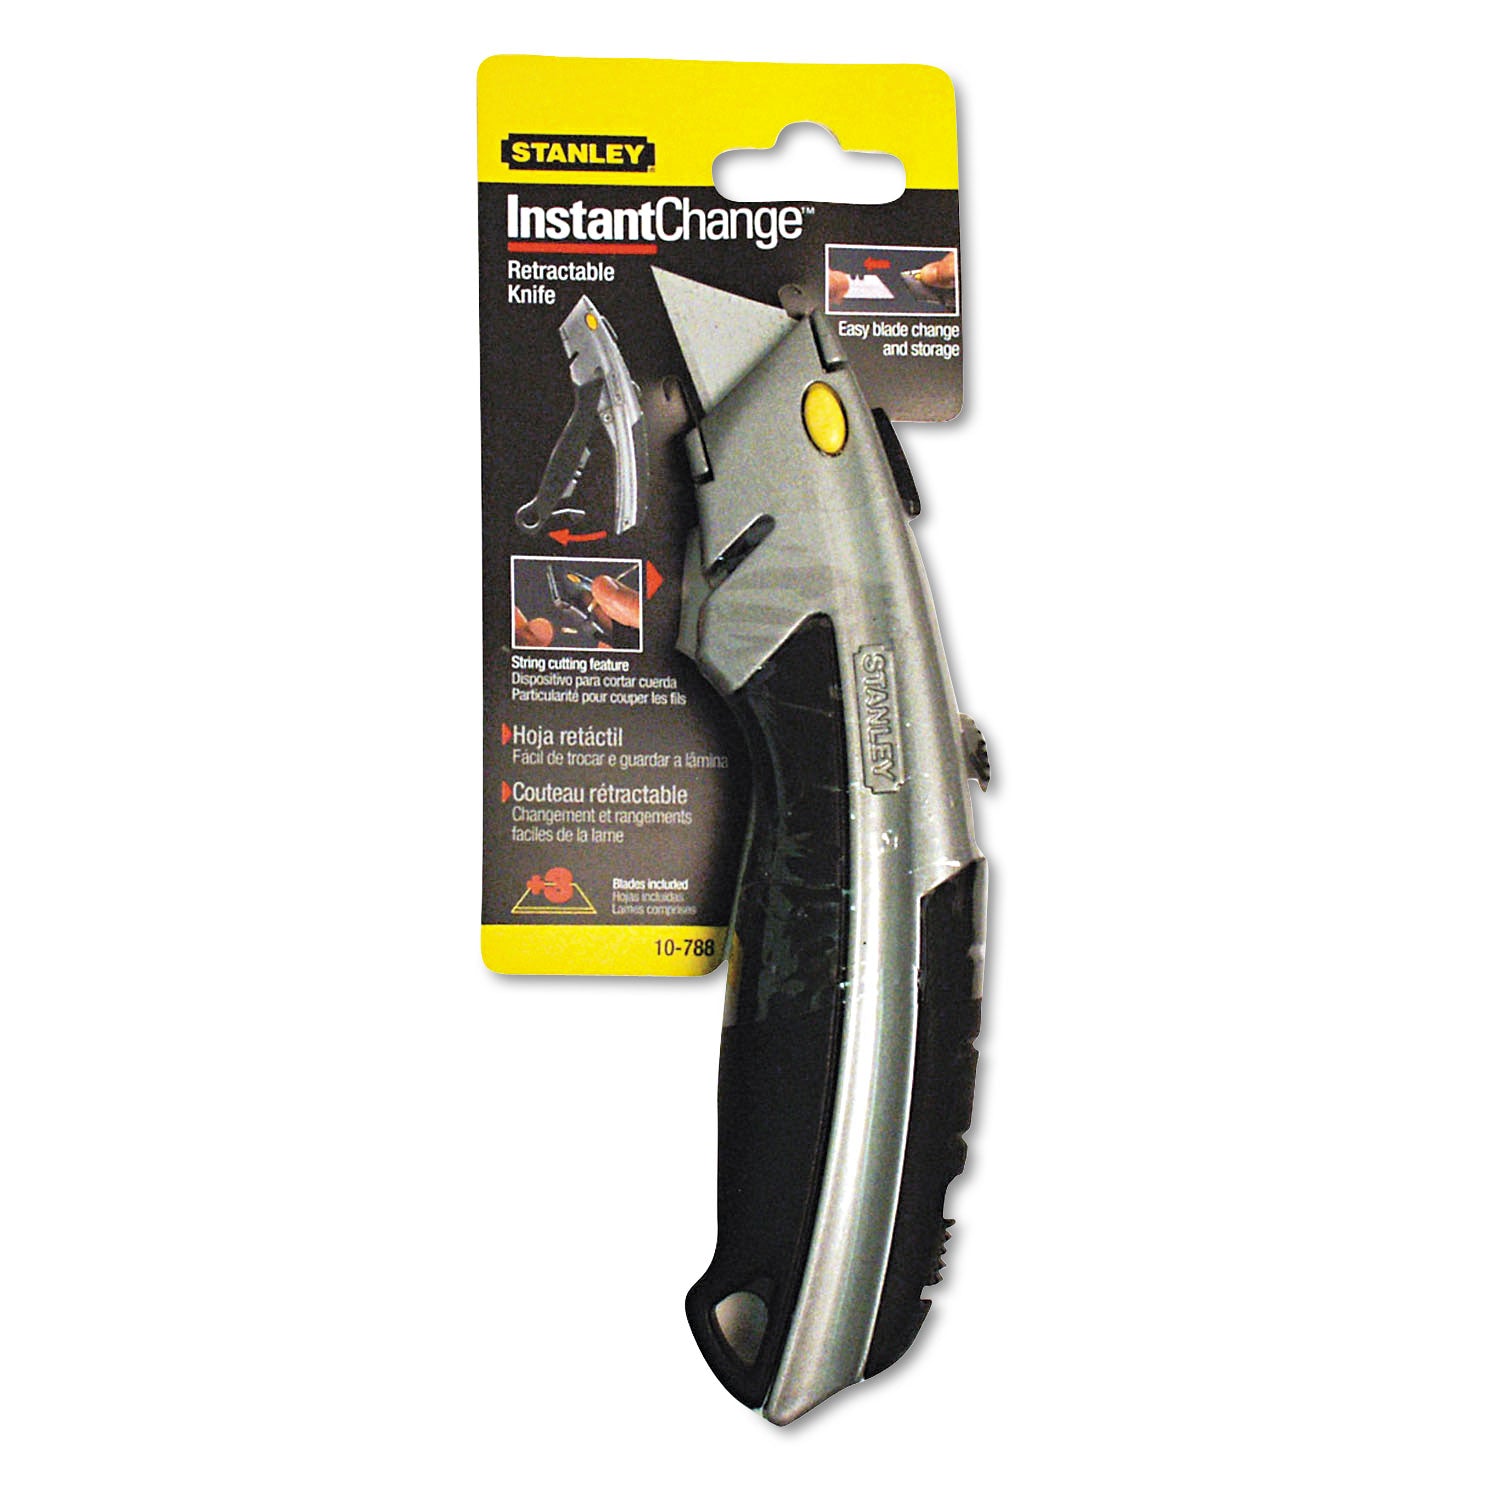 Curved Quick-Change Utility Knife, Stainless Steel Retractable Blade, 3 Blades, 6.5" Metal Handle, Black/Chrome - 